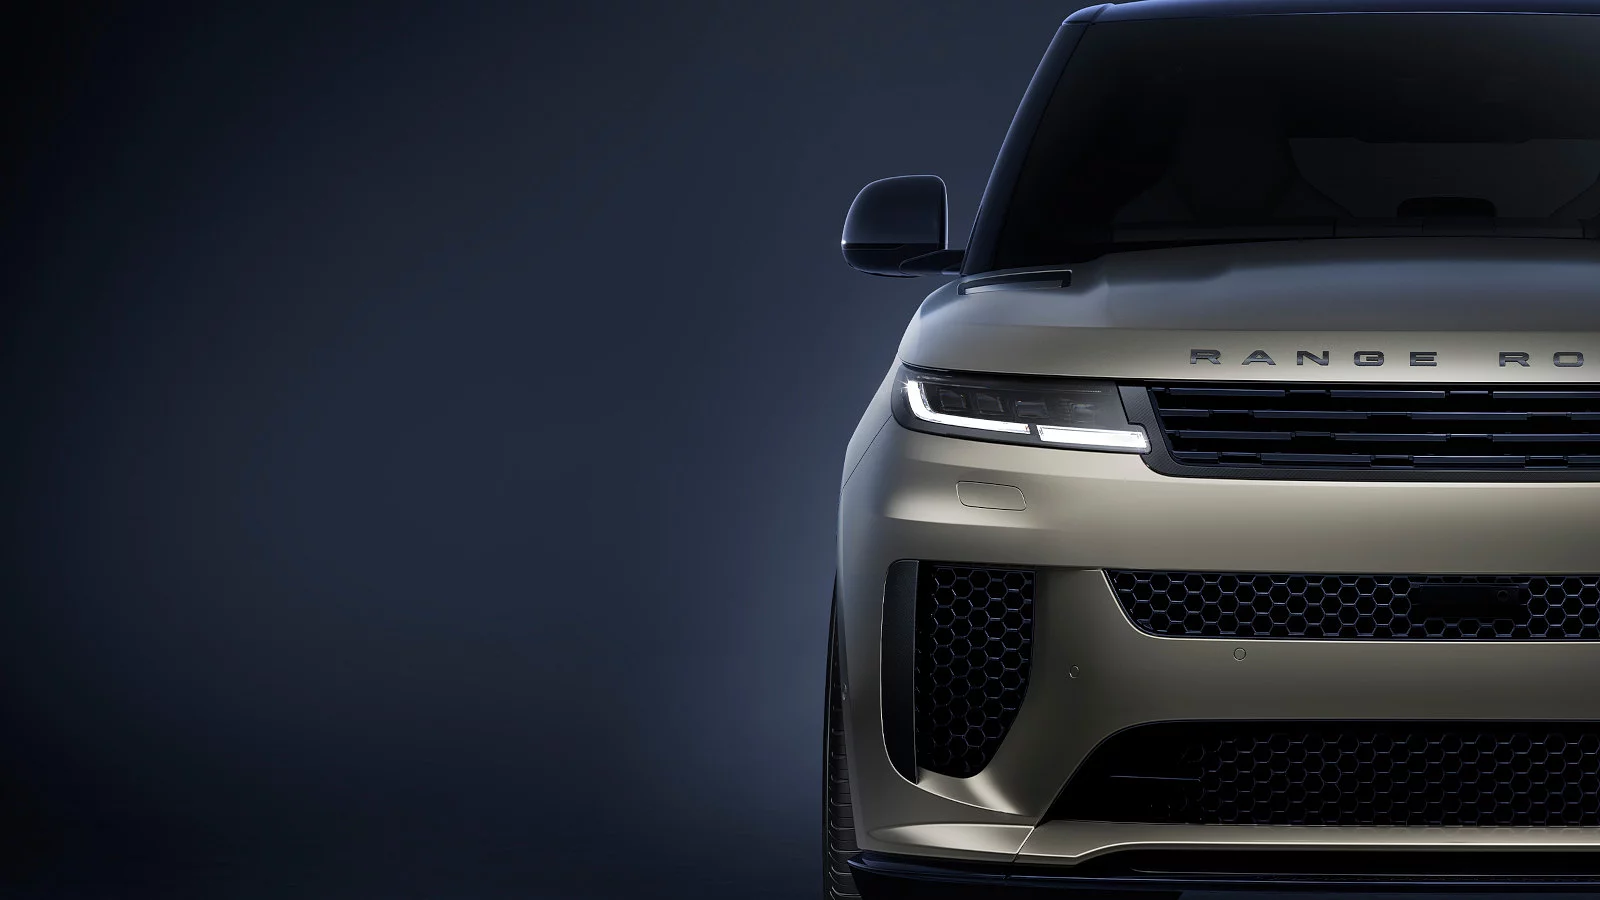 Front view of the Range Rover SV